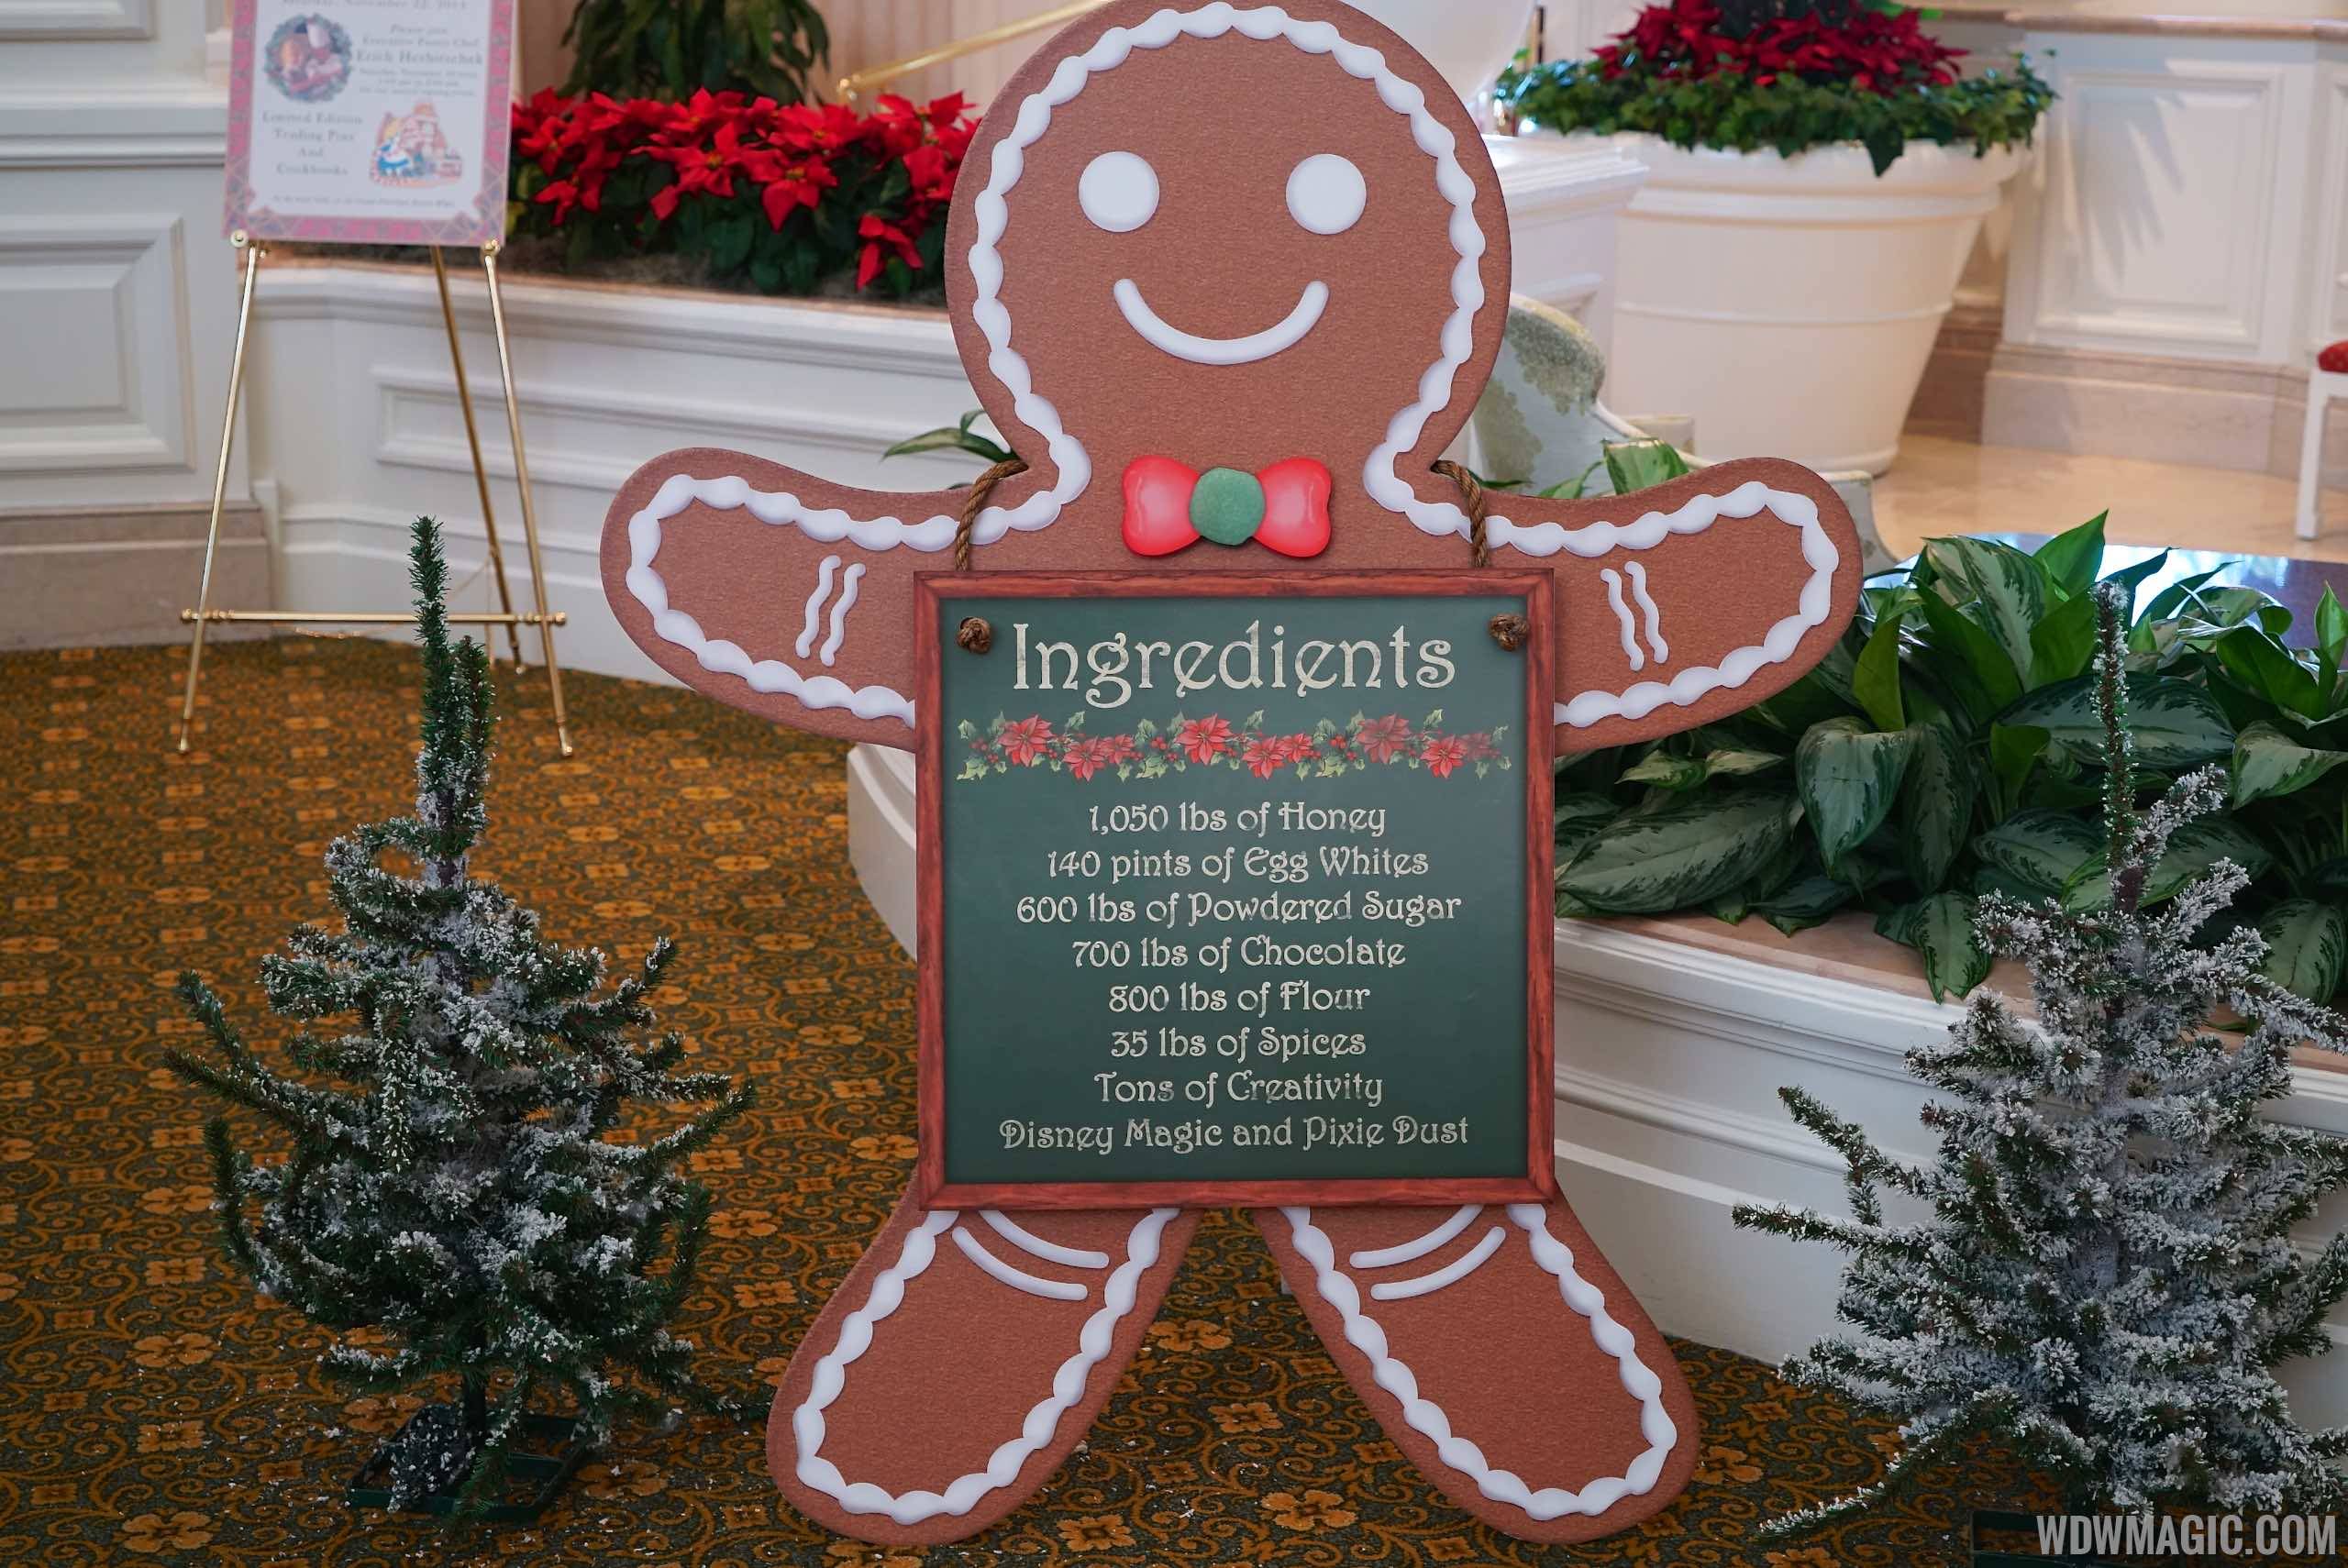 PHOTOS - Gingerbread House now open at Disney's Grand Floridian Resort